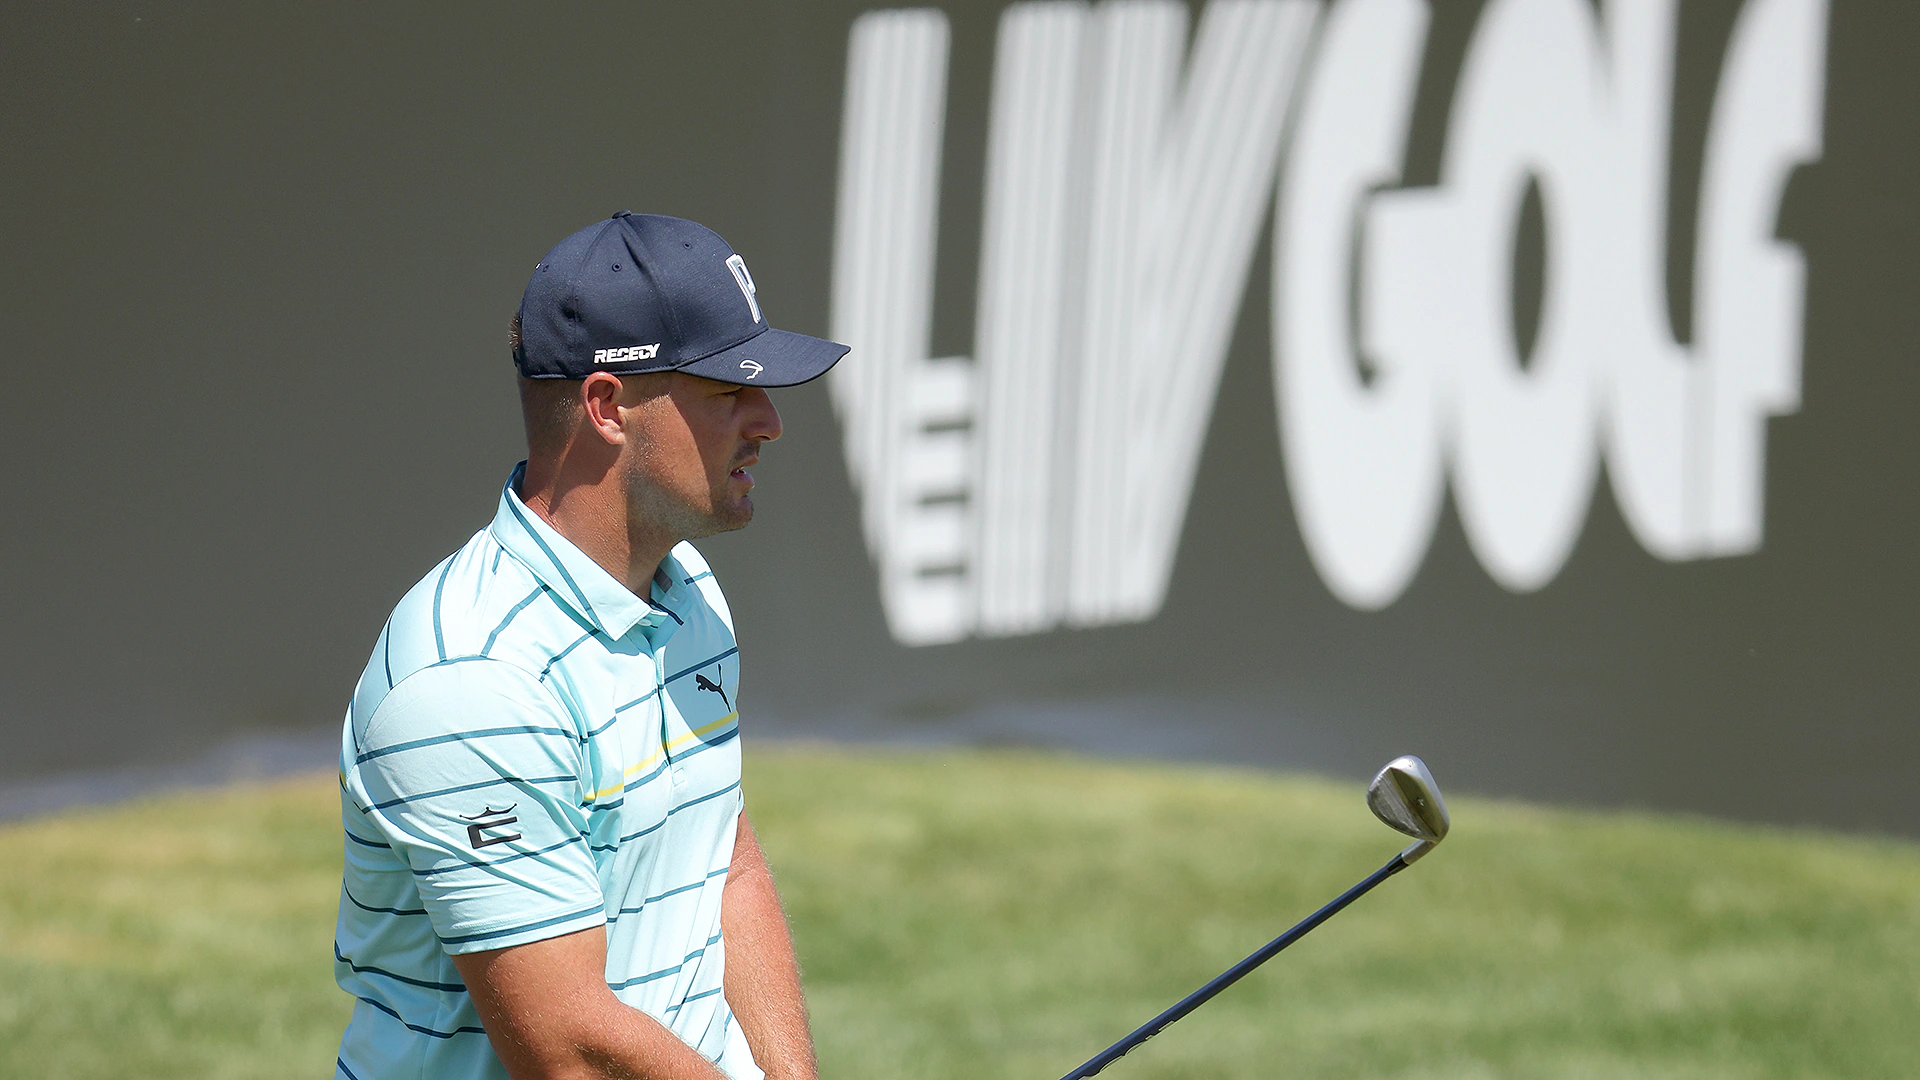 Eleven LIV players file suit again PGA Tour; three looking to get into playoffs